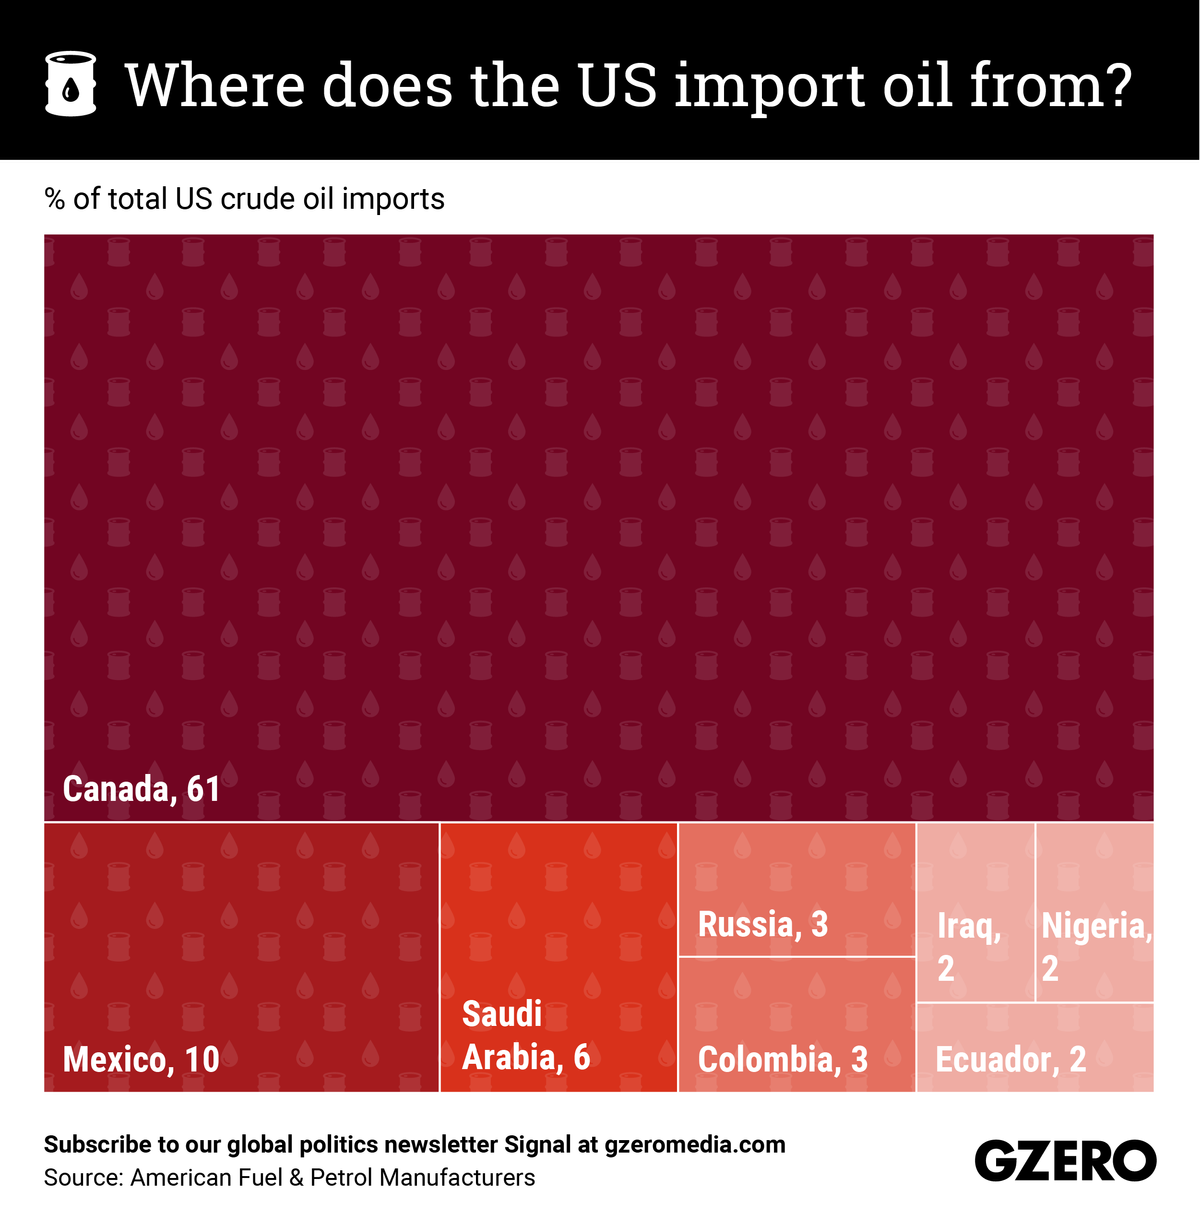 The Graphic Truth: Where does the US import oil from?